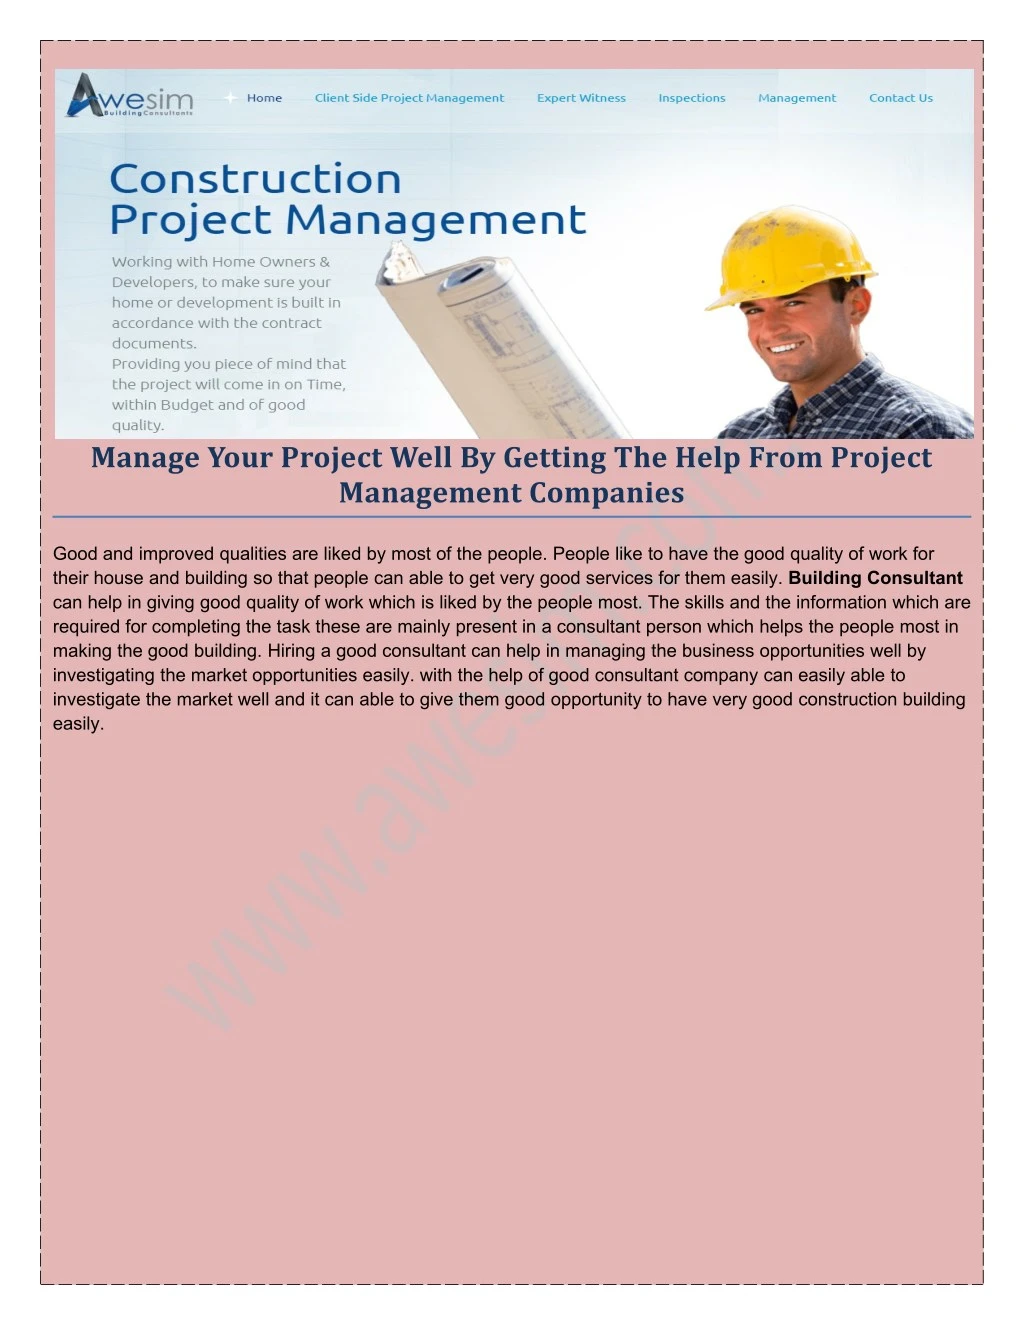 manage your project well by getting the help from